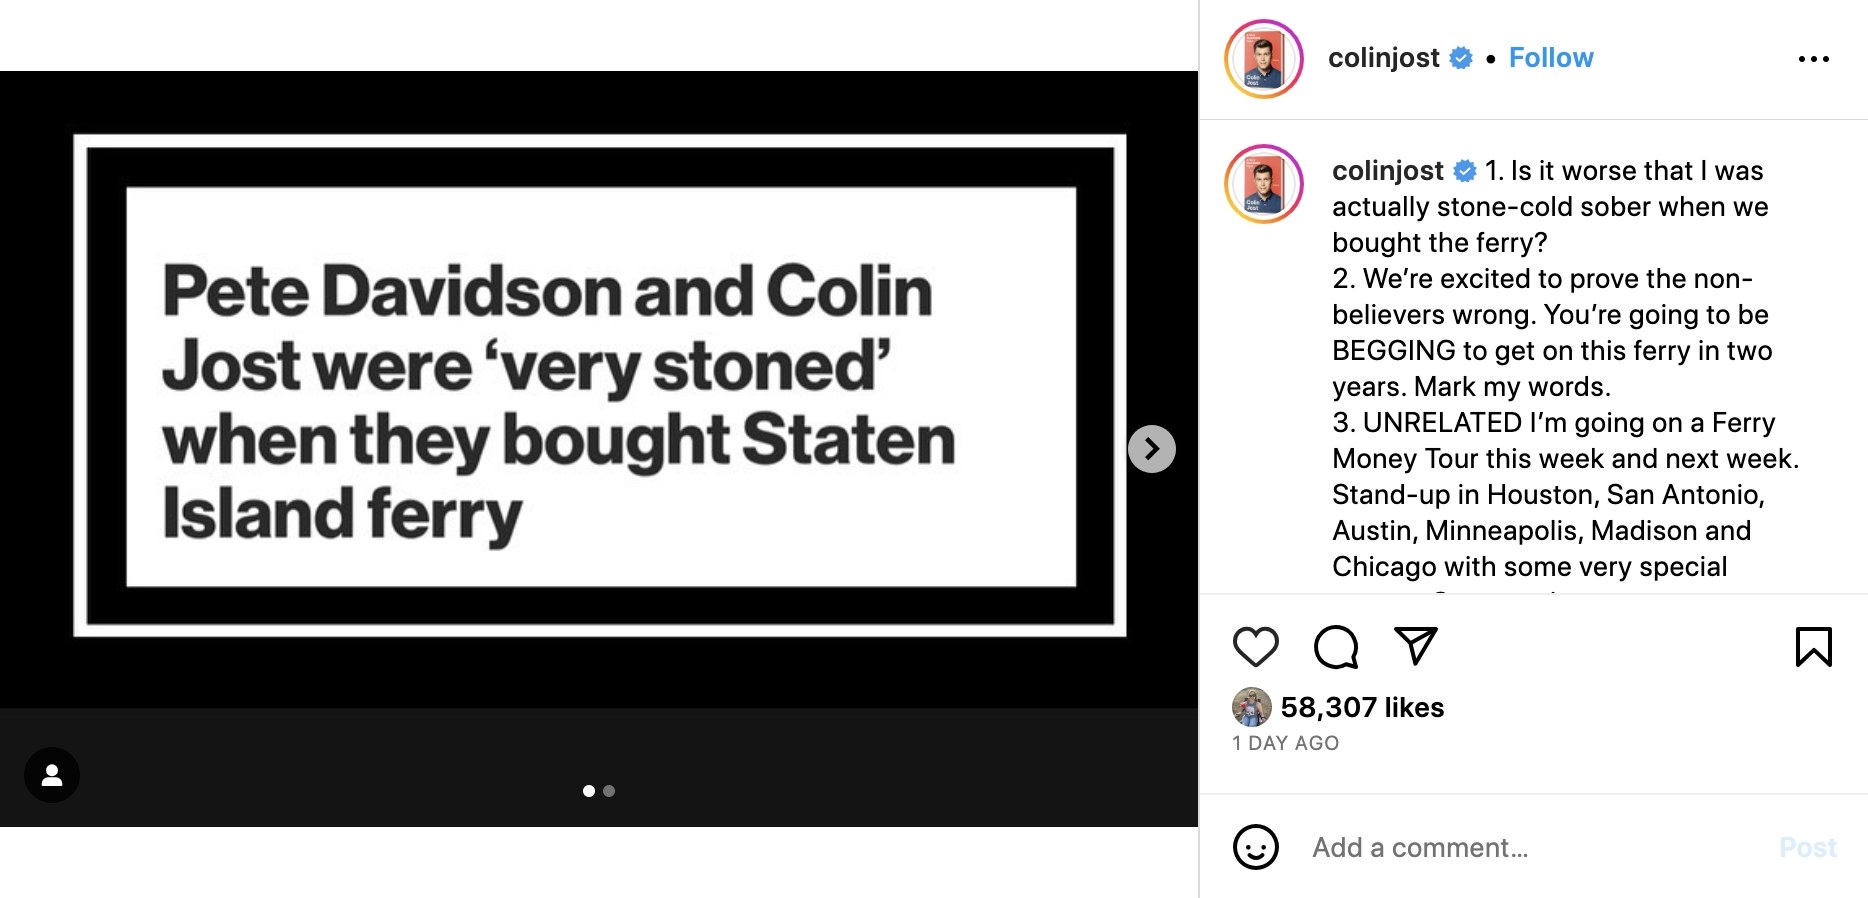 A screenshot of a headline that says &quot;Pete Davidson and Colin Jost were very stoned when they bought the ferry&quot;